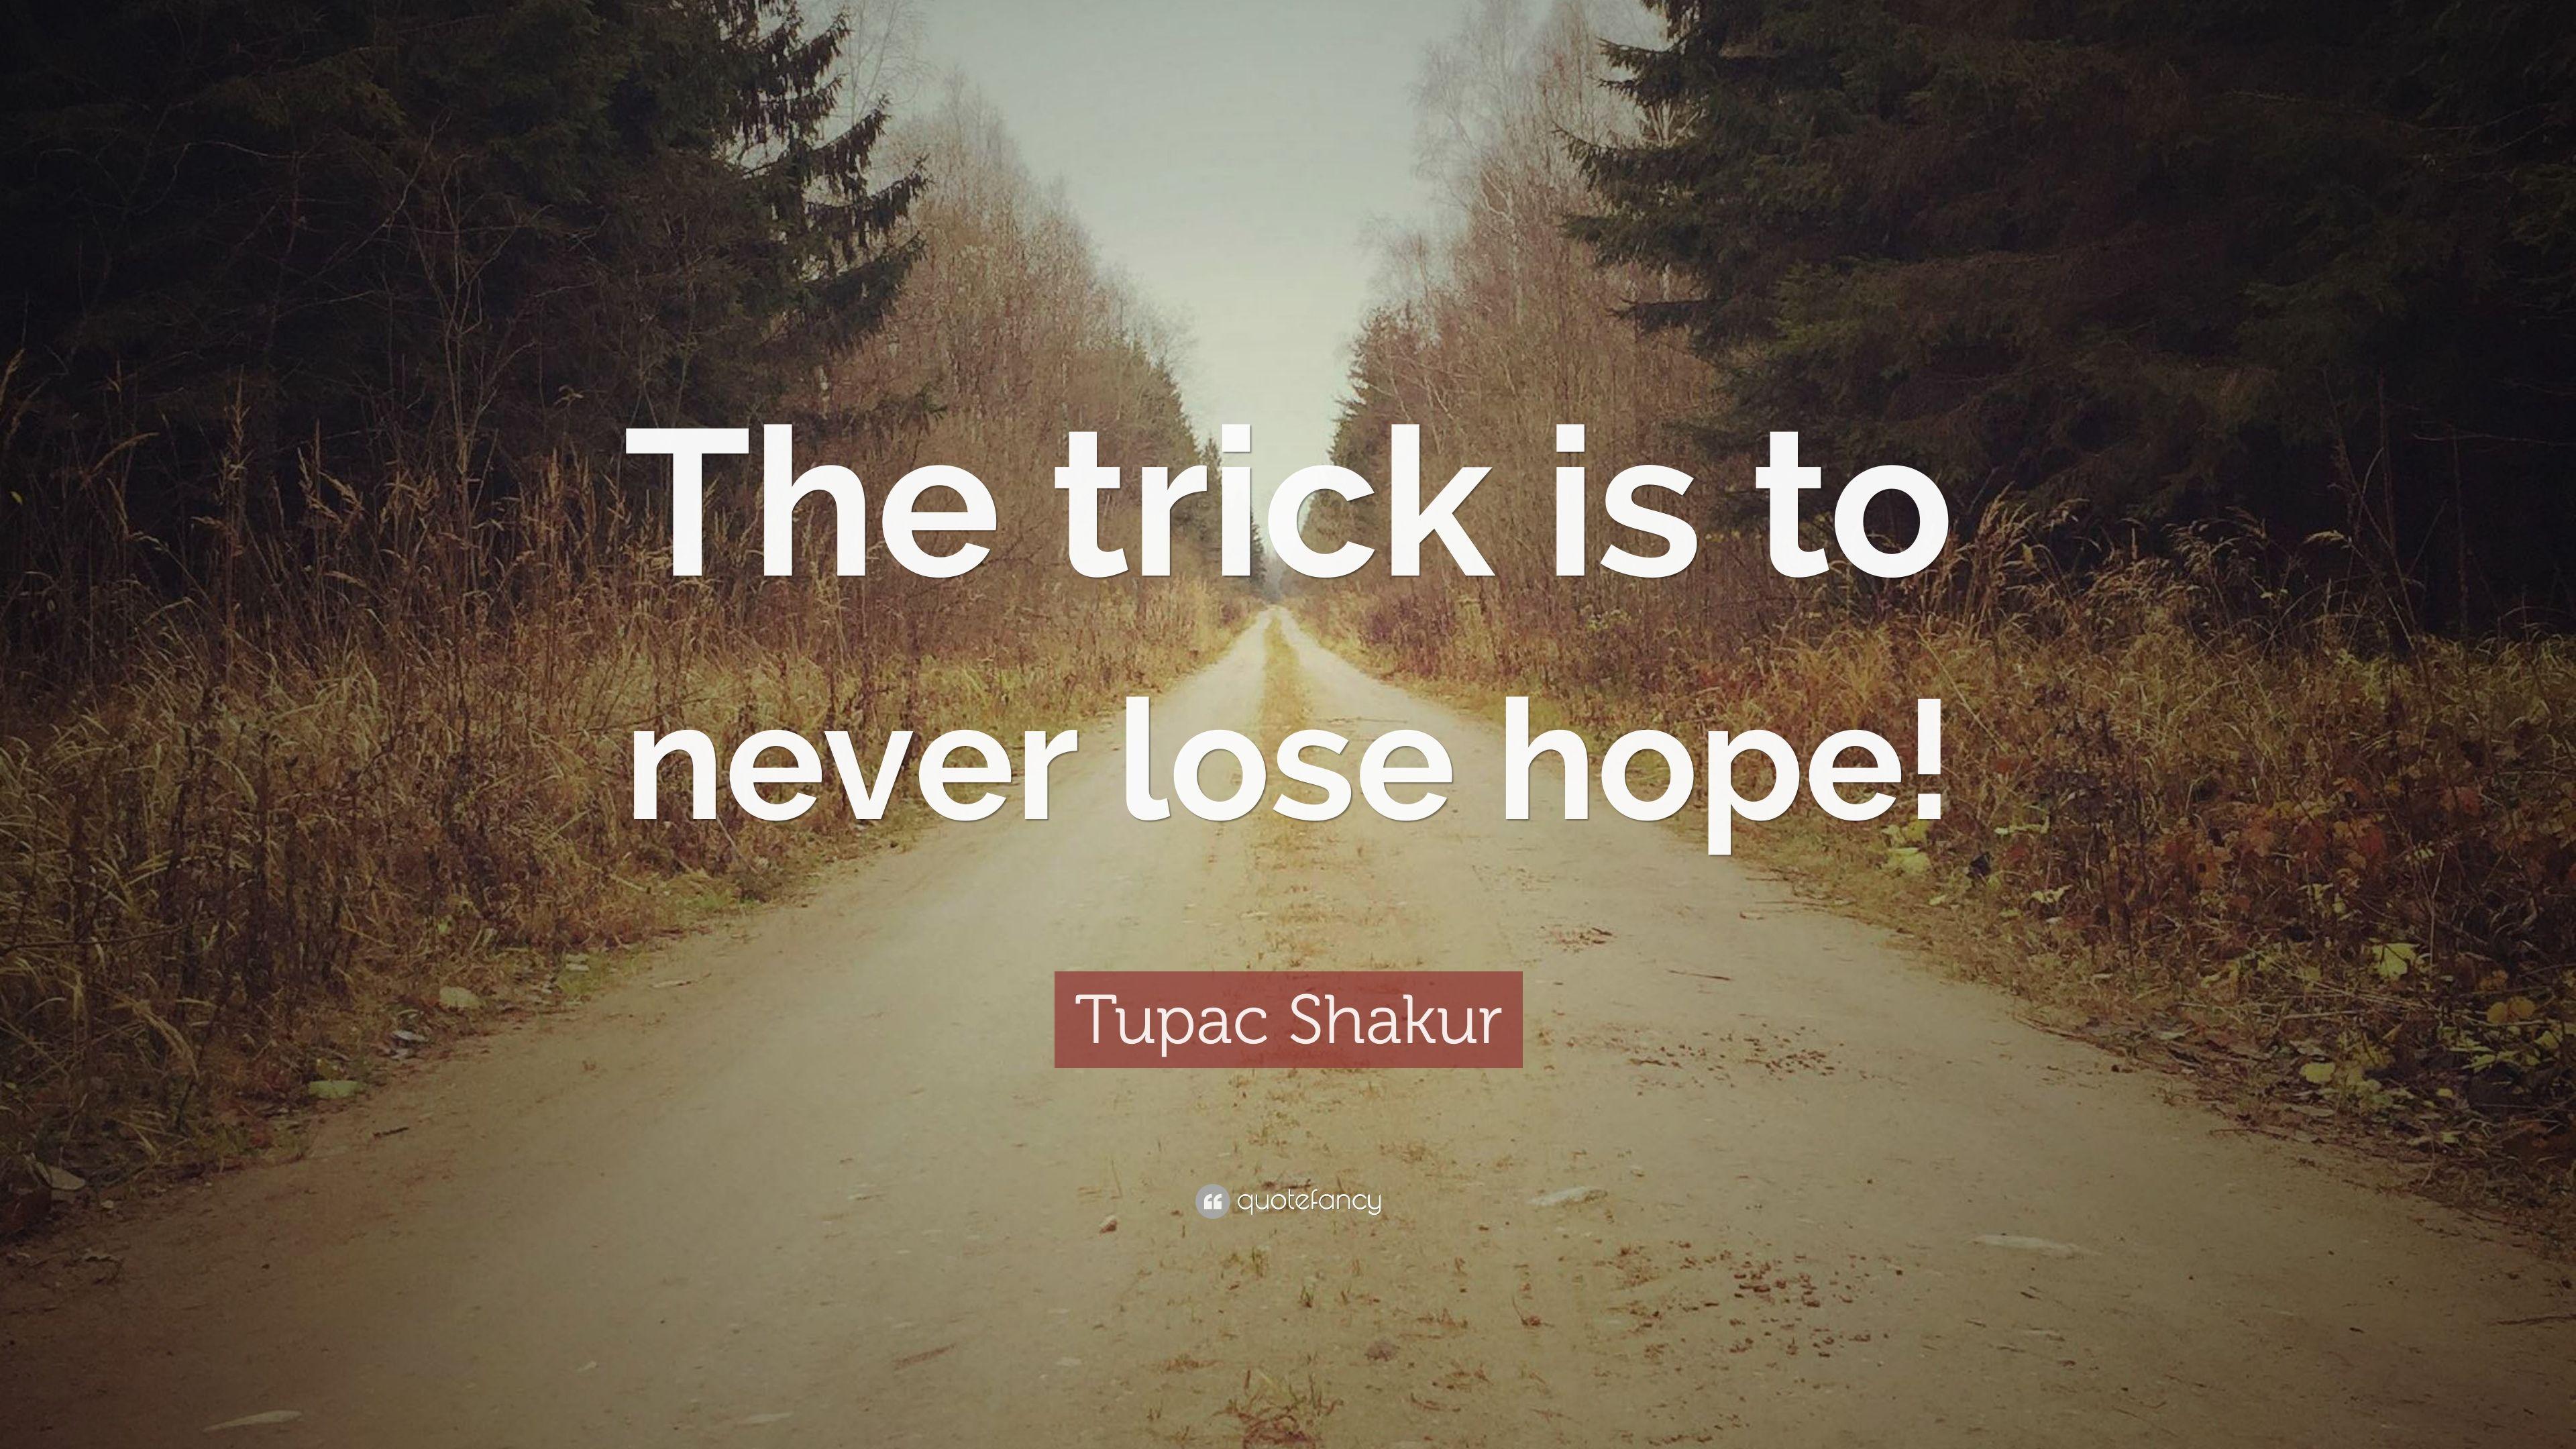 Tupac Shakur Quote: "The trick is to never lose hope! 